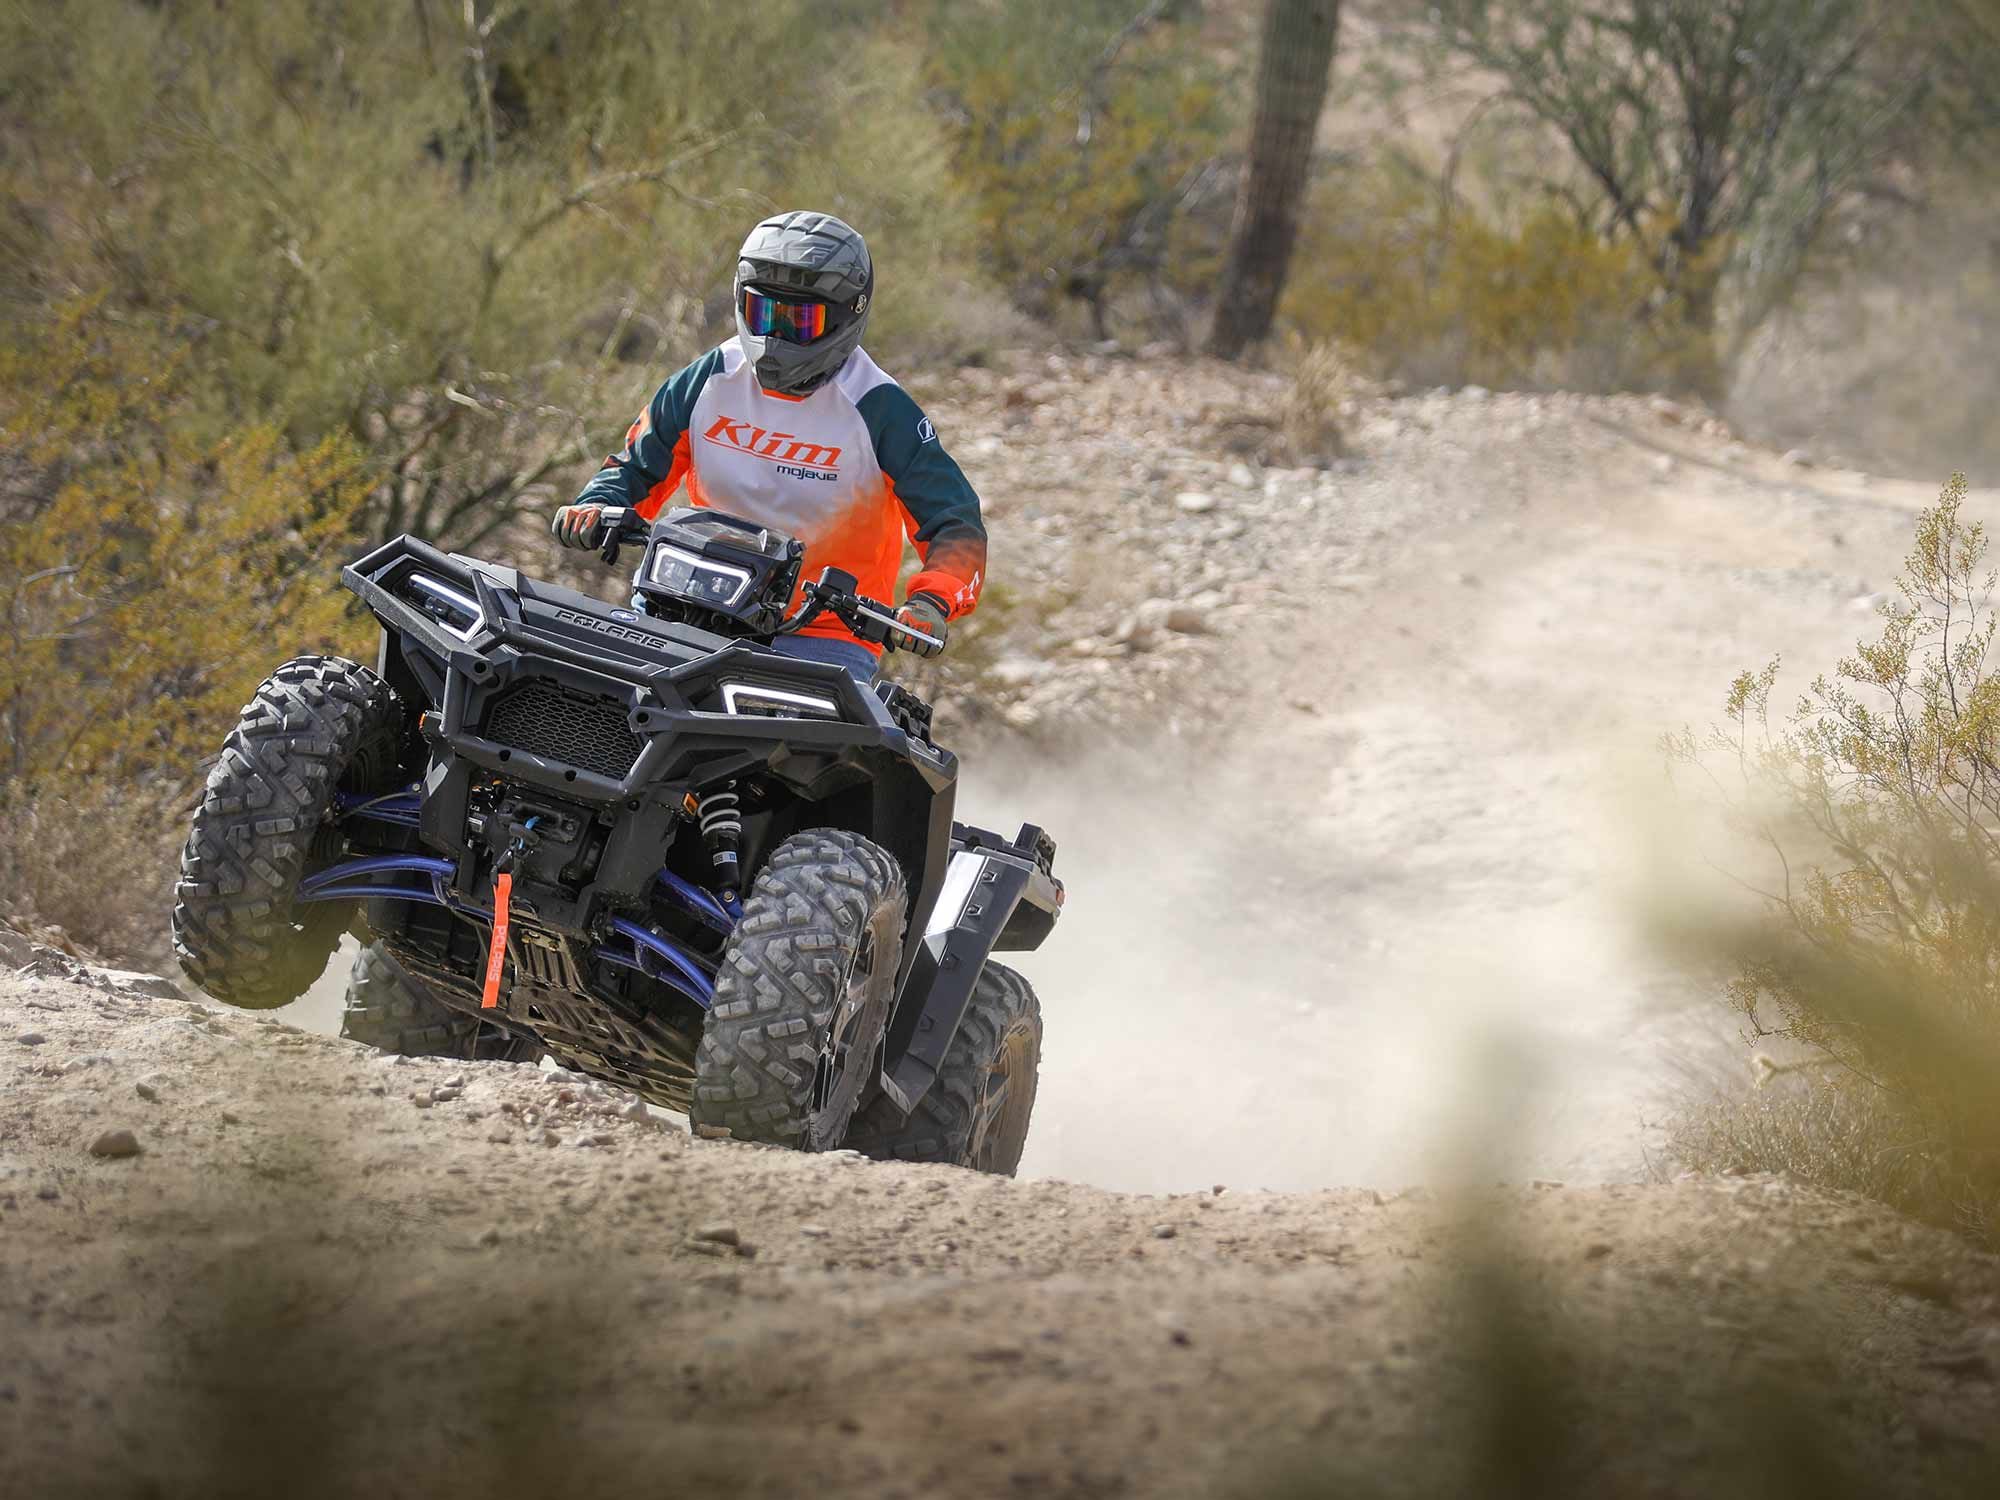 Rugged trails are no match for the Polaris Sportsman XP 1000.